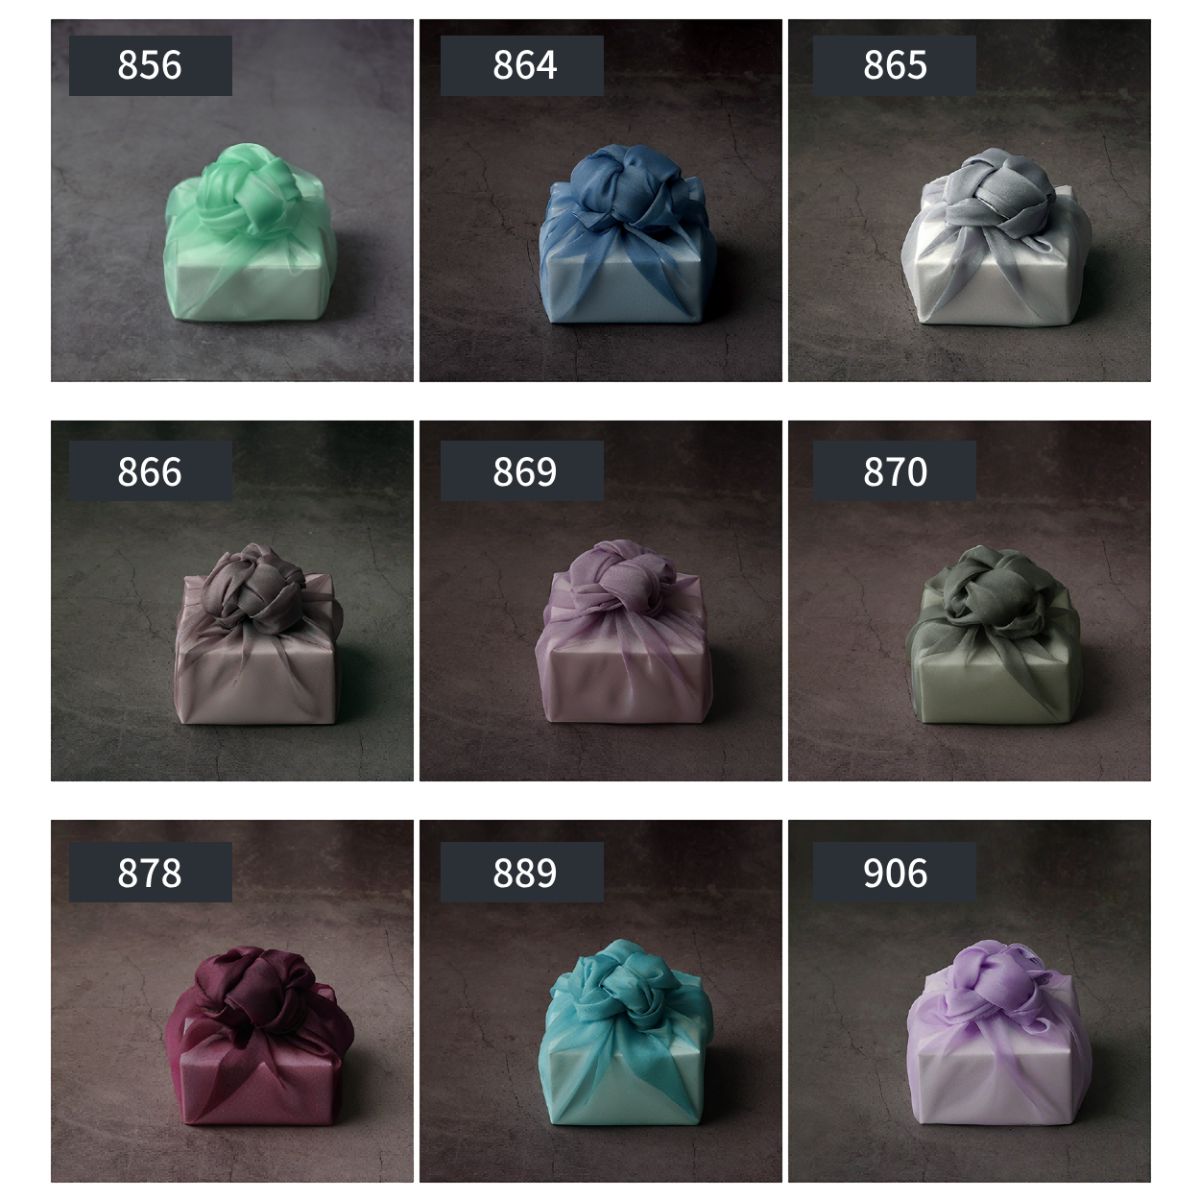 nine color of Bojagi. the first row:mint,navy,silver grey. the second row:cocoa,violet,olive. the third row:wine,teal,light purple.